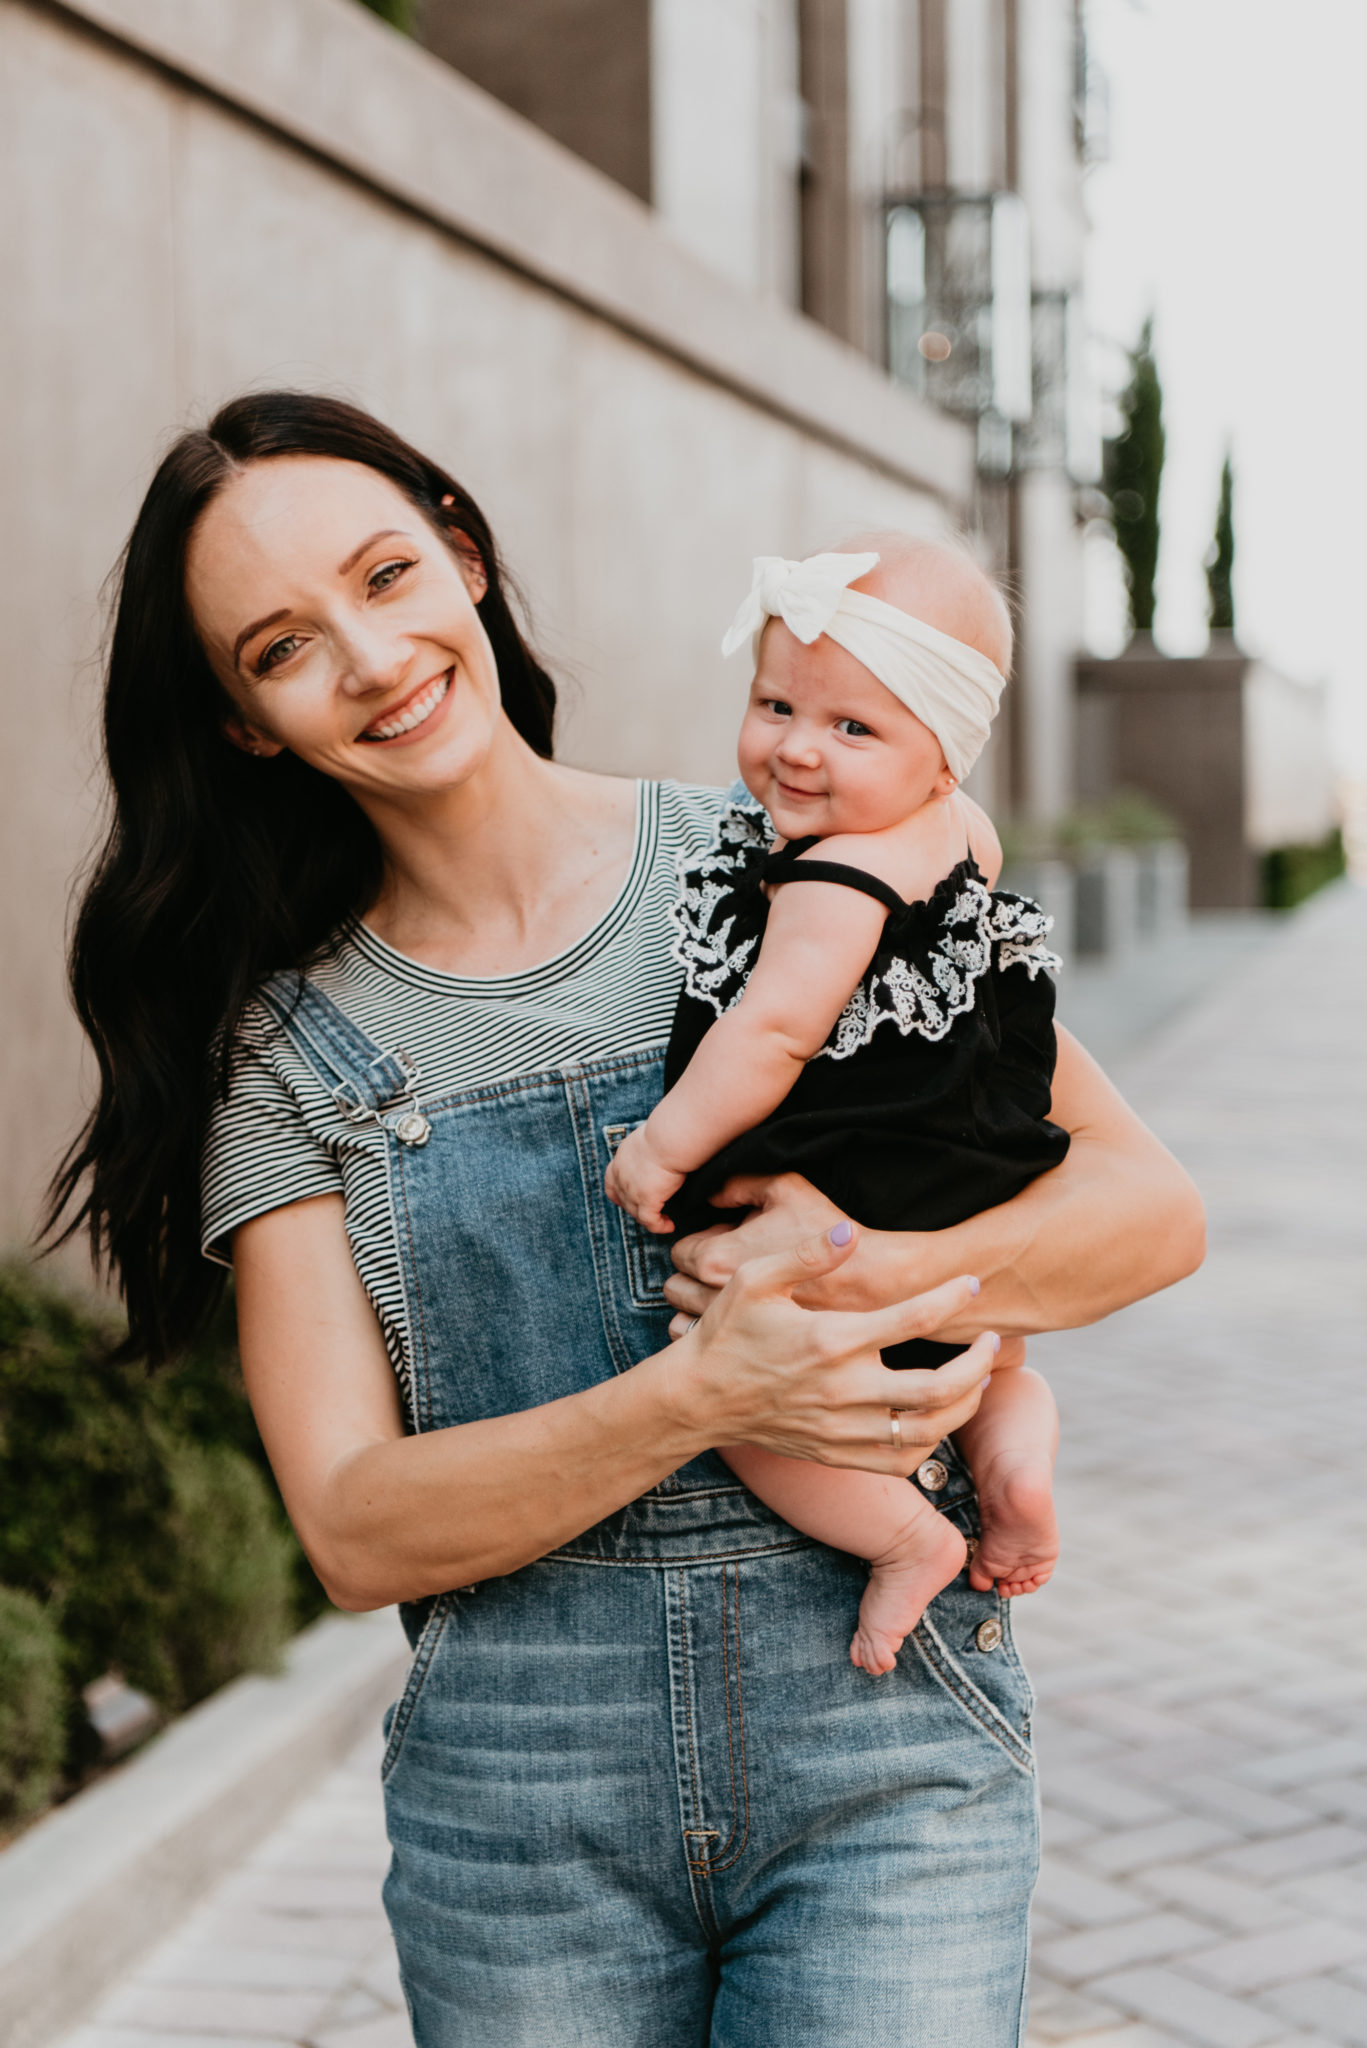 Rainbow Light Review - The Best Postnatal Vitamins Every New Mom Should Take featured by popular Las Vegas lifestyle blogger, Outfits & Outings